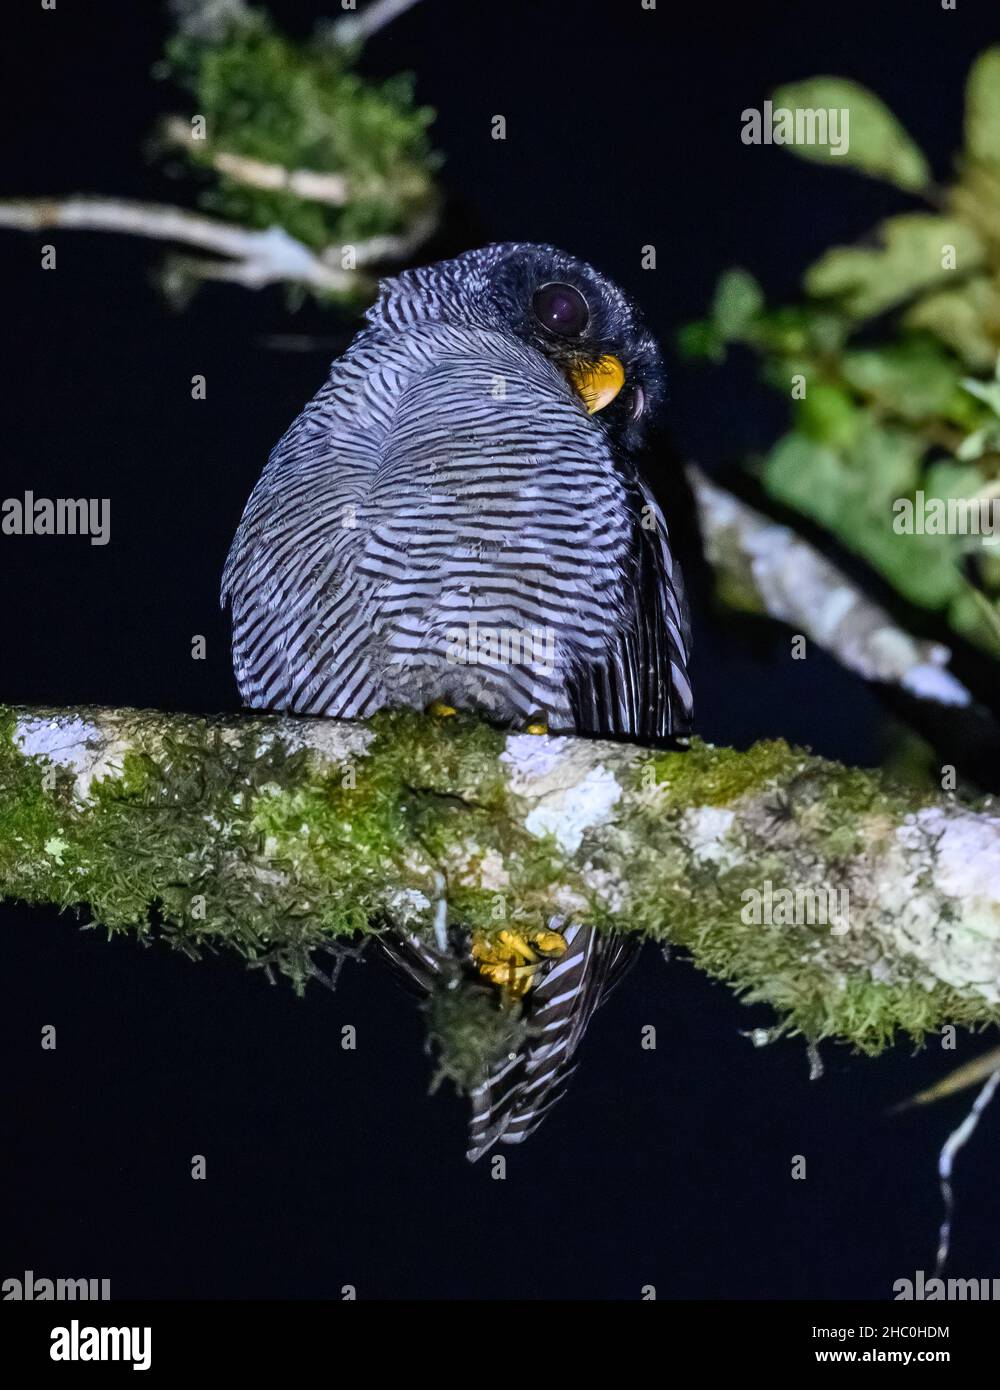 A Black-and-white Owl (Ciccaba nigrolineata) perched on a branch. Ecuador, South America. Stock Photo